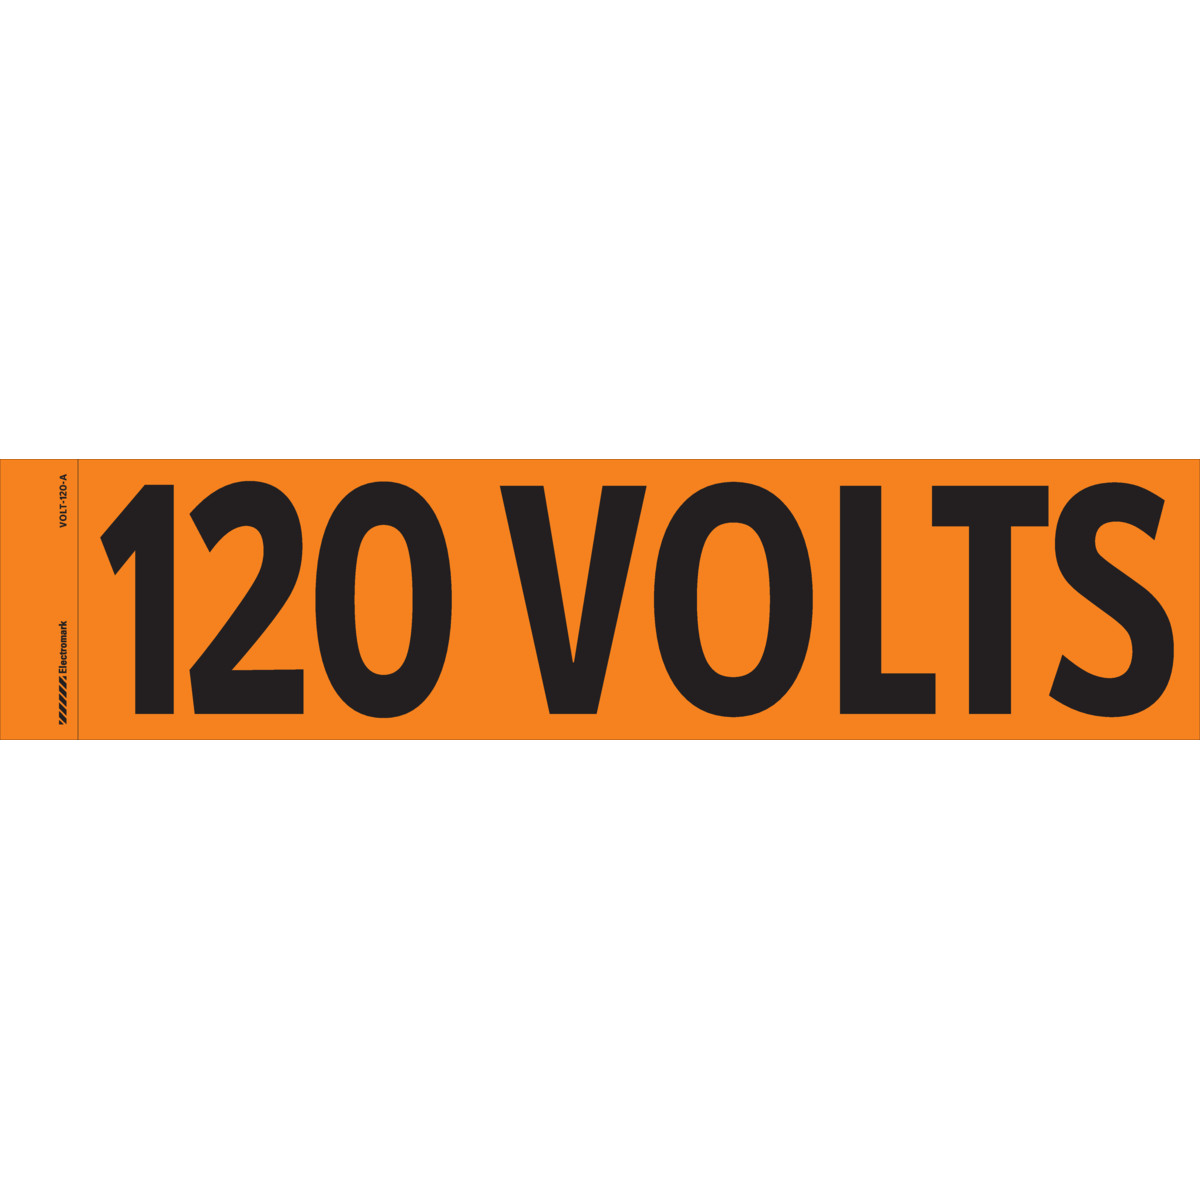 120 Volts Markers